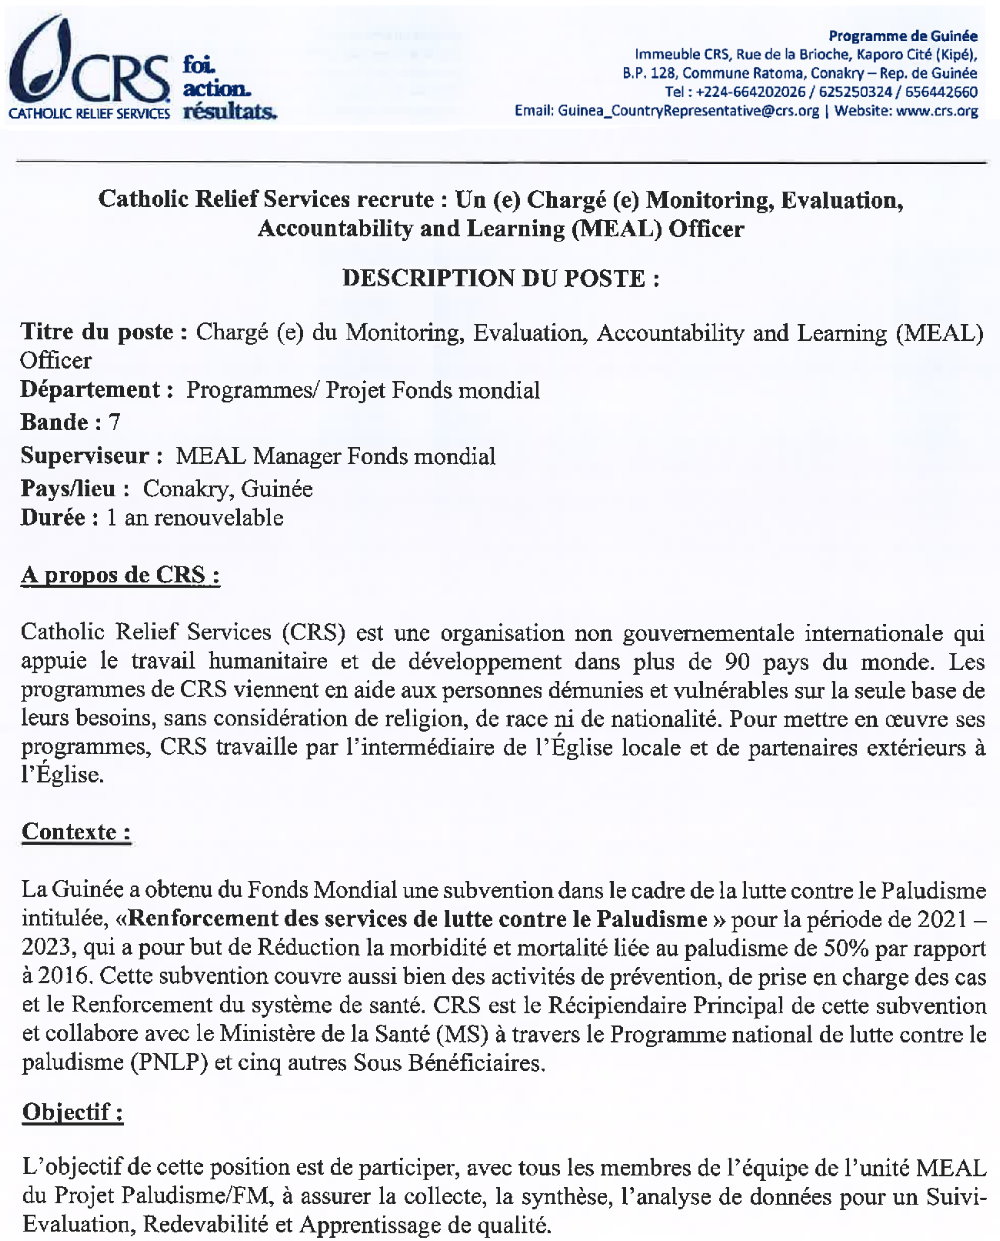 Avis de recrutement d’un(e) chargé(e) Monitoring, Evaluation Accountability and Learning(MEAL) Officer p1